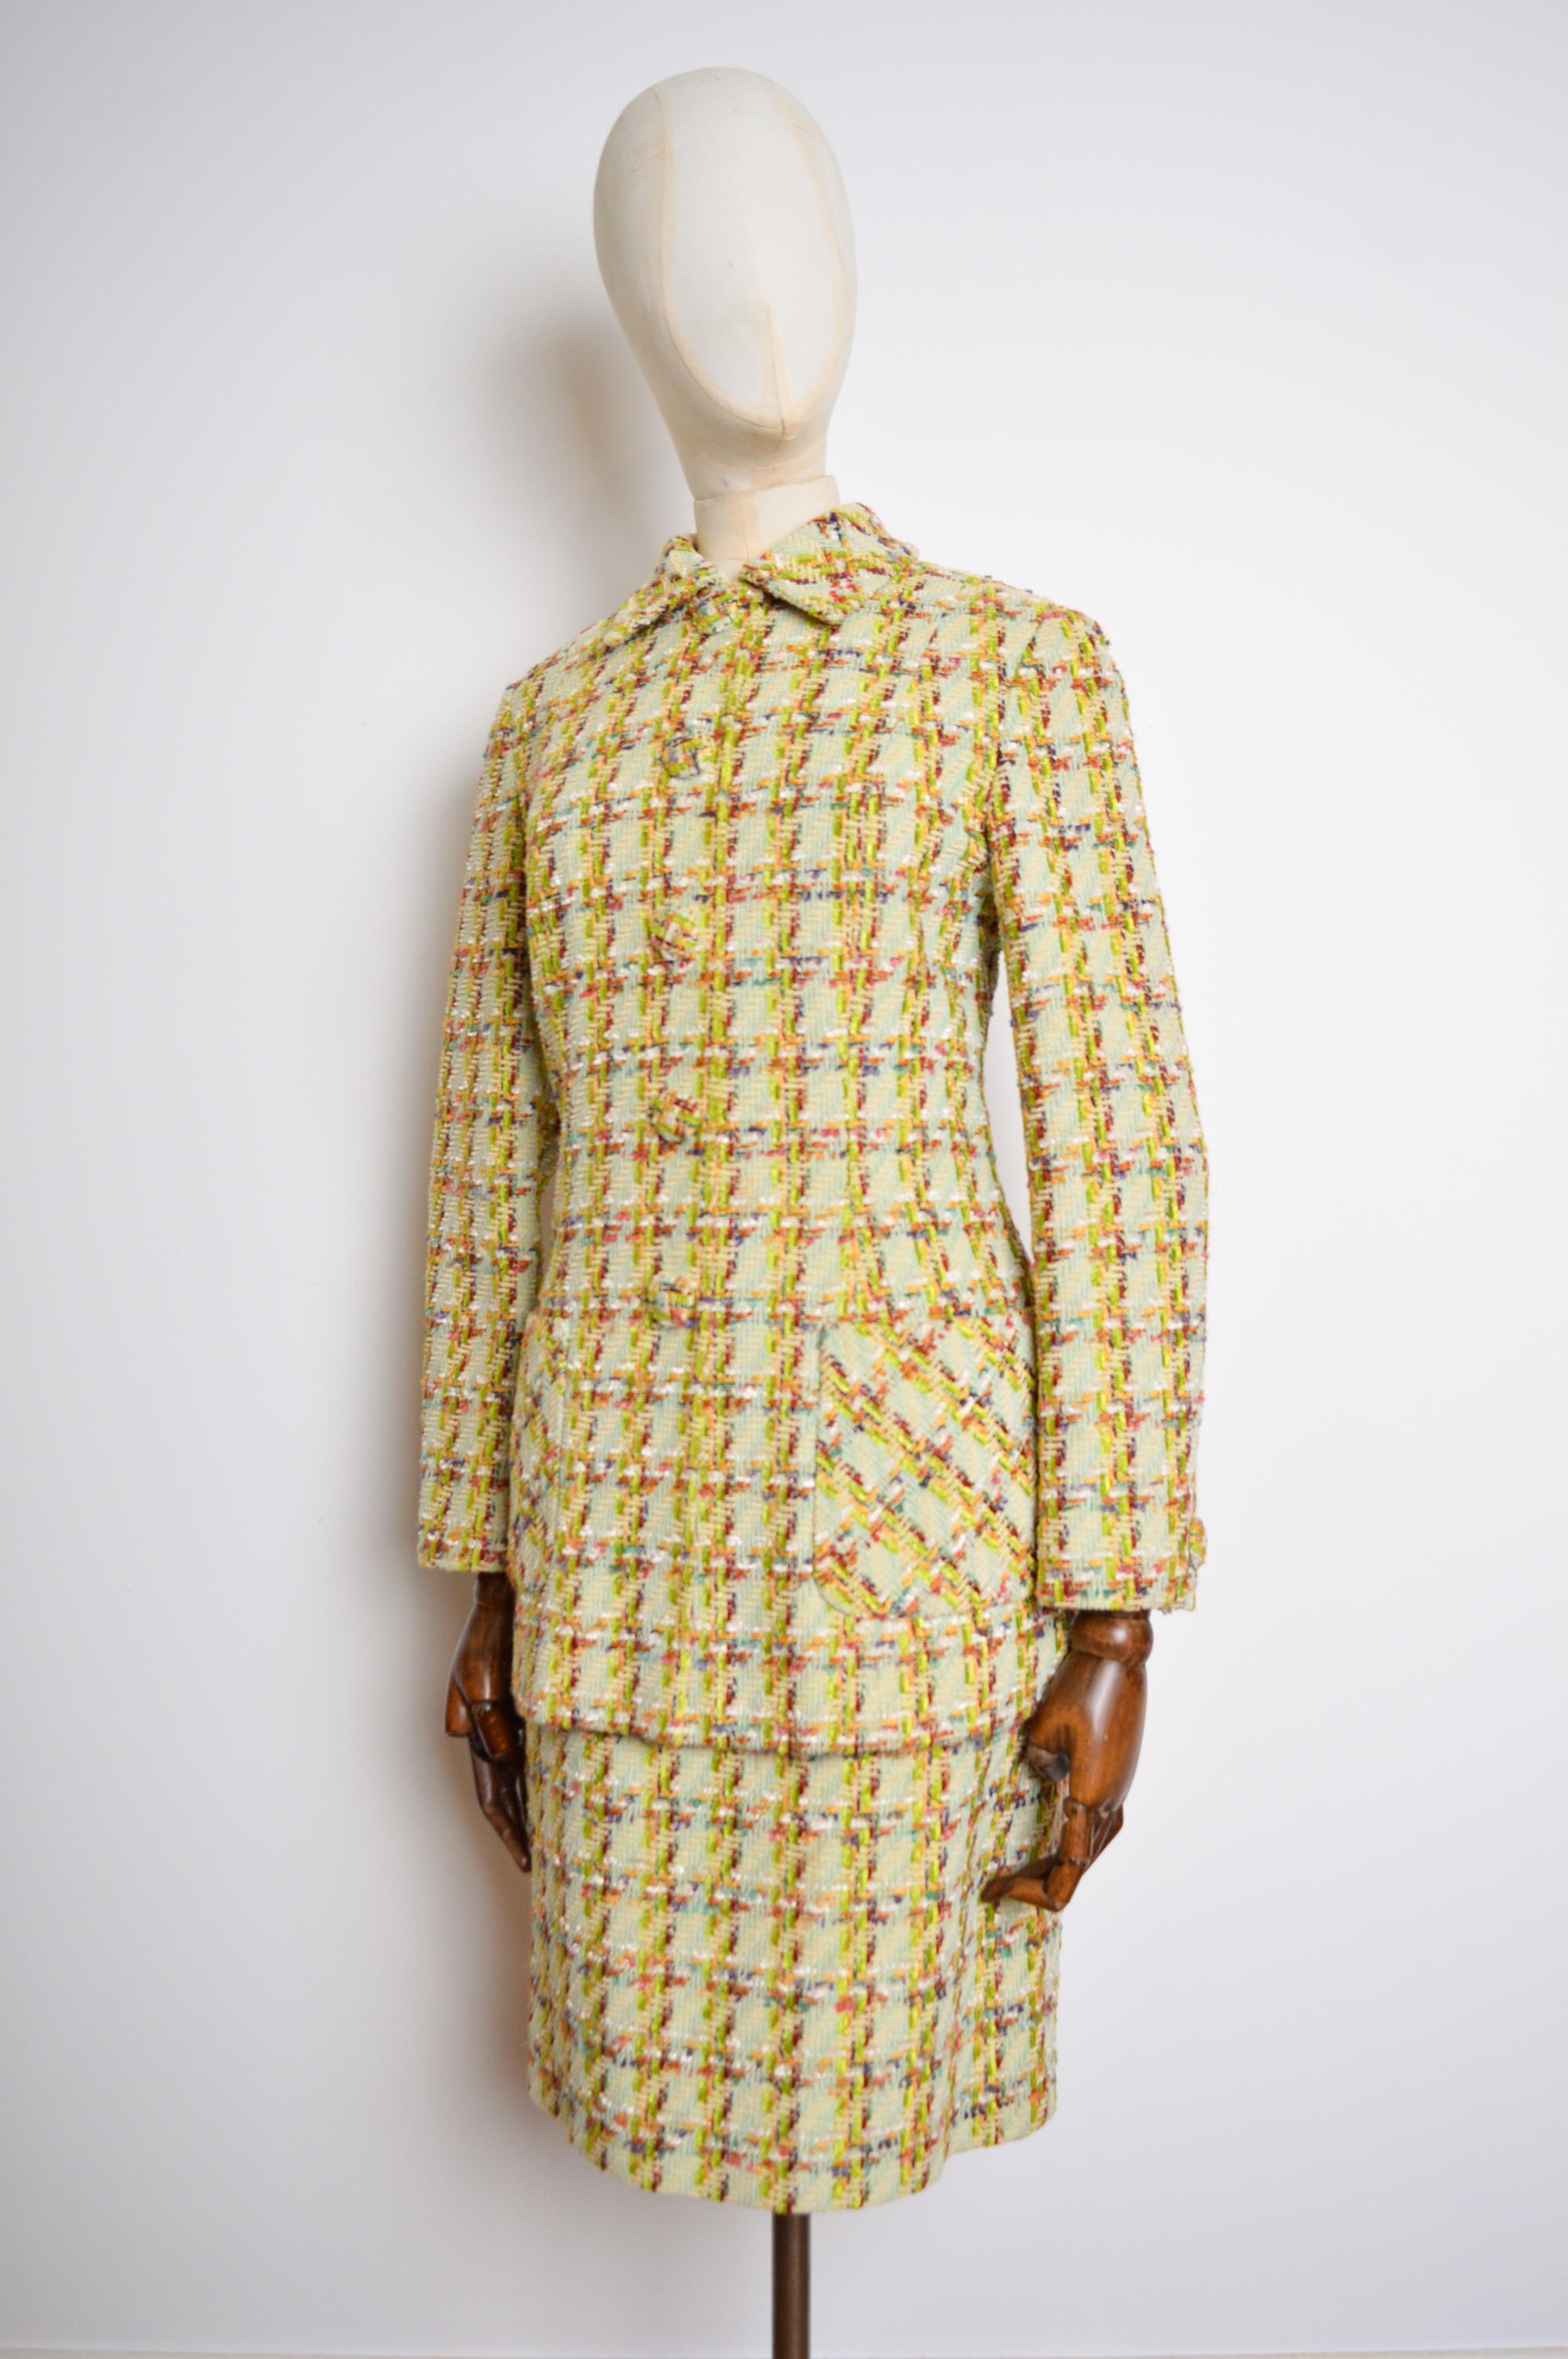 S/S 1993 ROCHAS Jewel Tone Lime Green Tweed Boucle Jacket & Skirt Matching Set For Sale 6